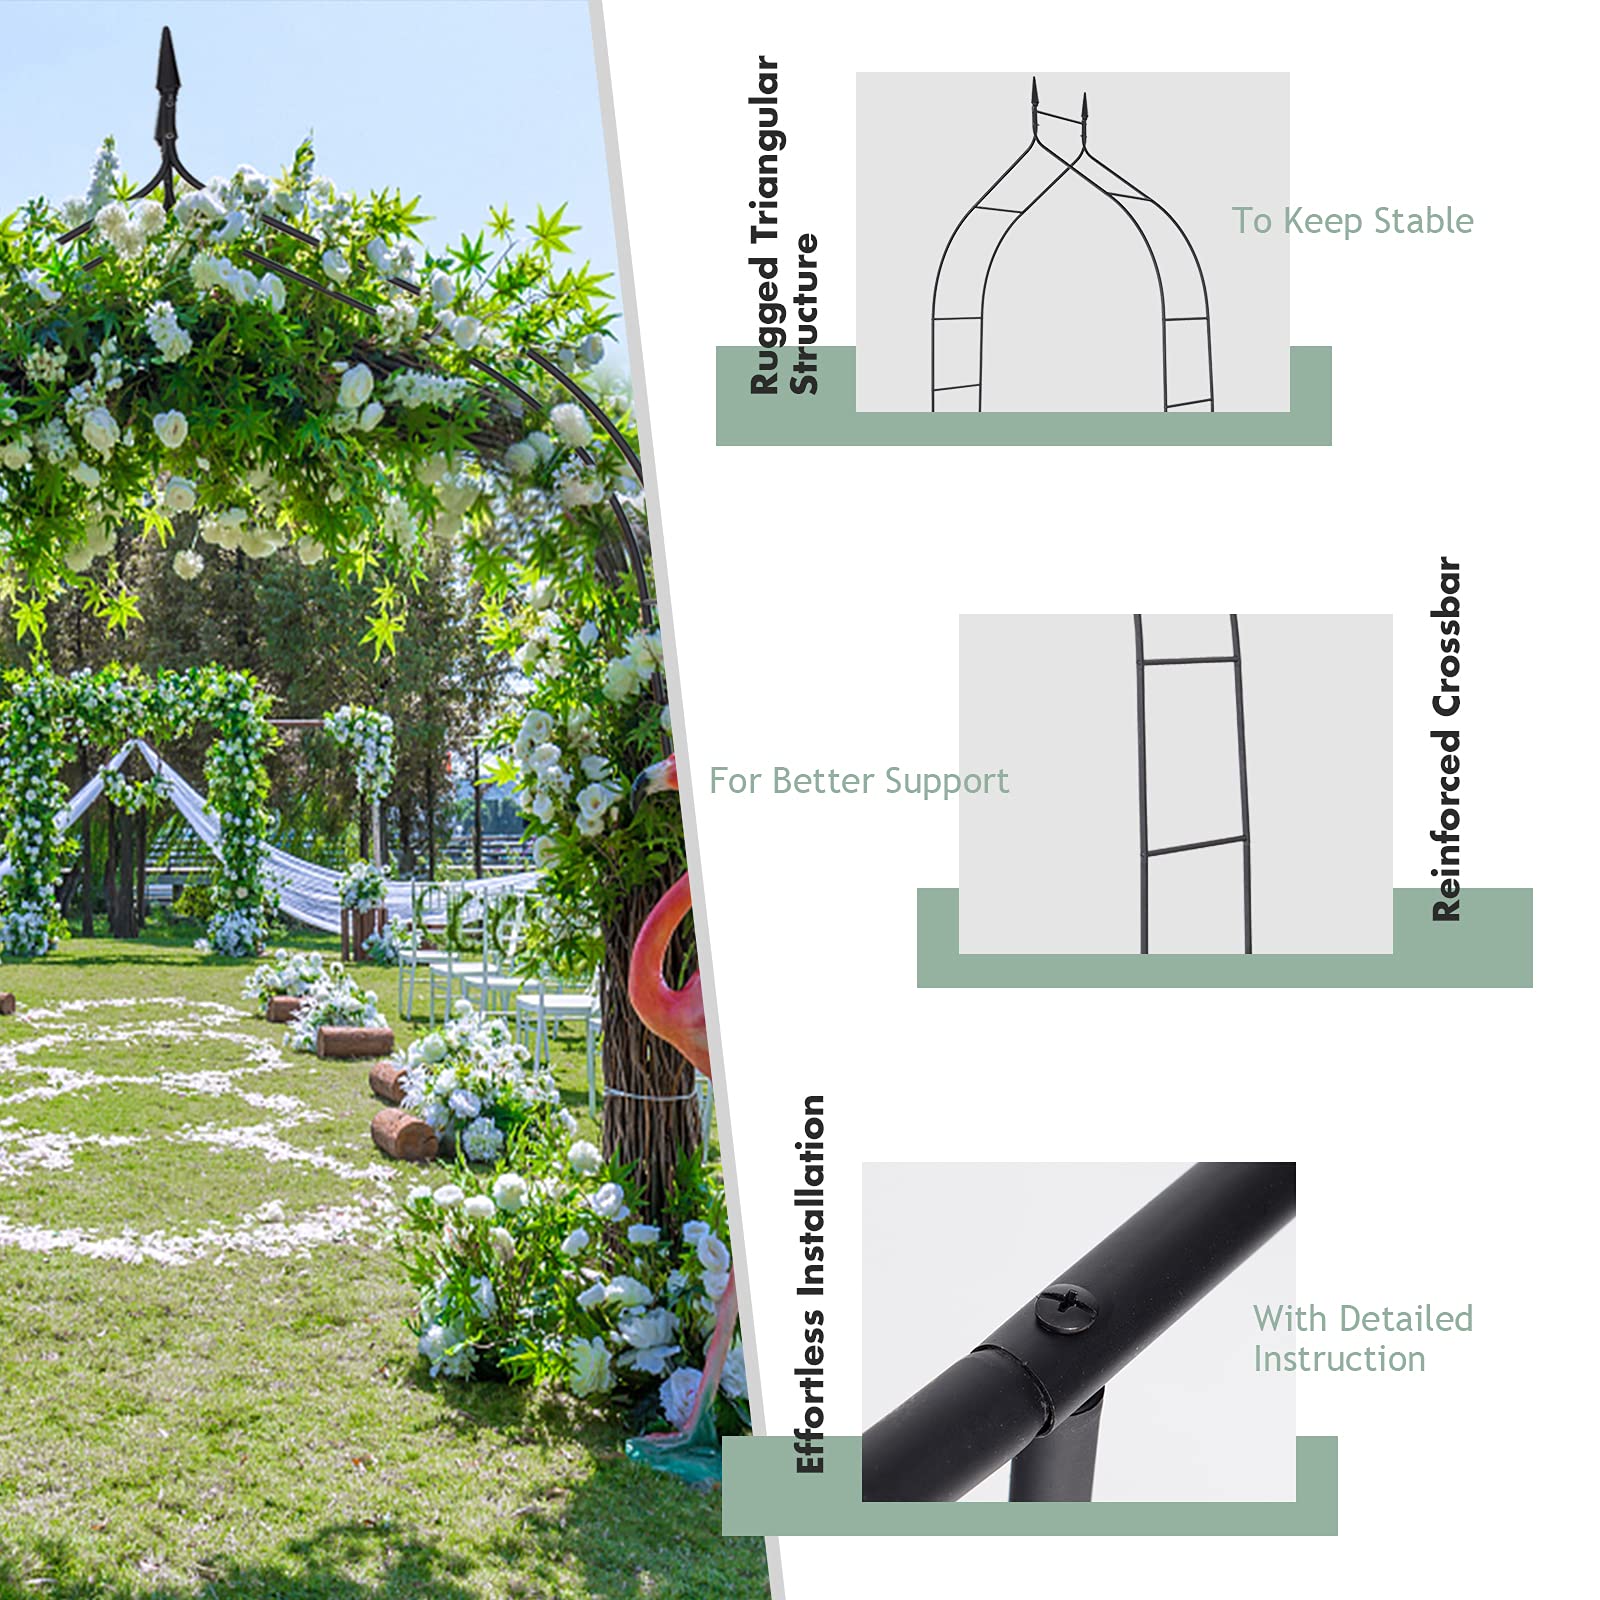 GOFLAME Garden Arch Steel, Rose Arbor for Various Climbing Plant, Outdoor Garden Lawn Backyard, Gothic Style Heavy Duty Wedding Party Ceremony Decoration (Black)